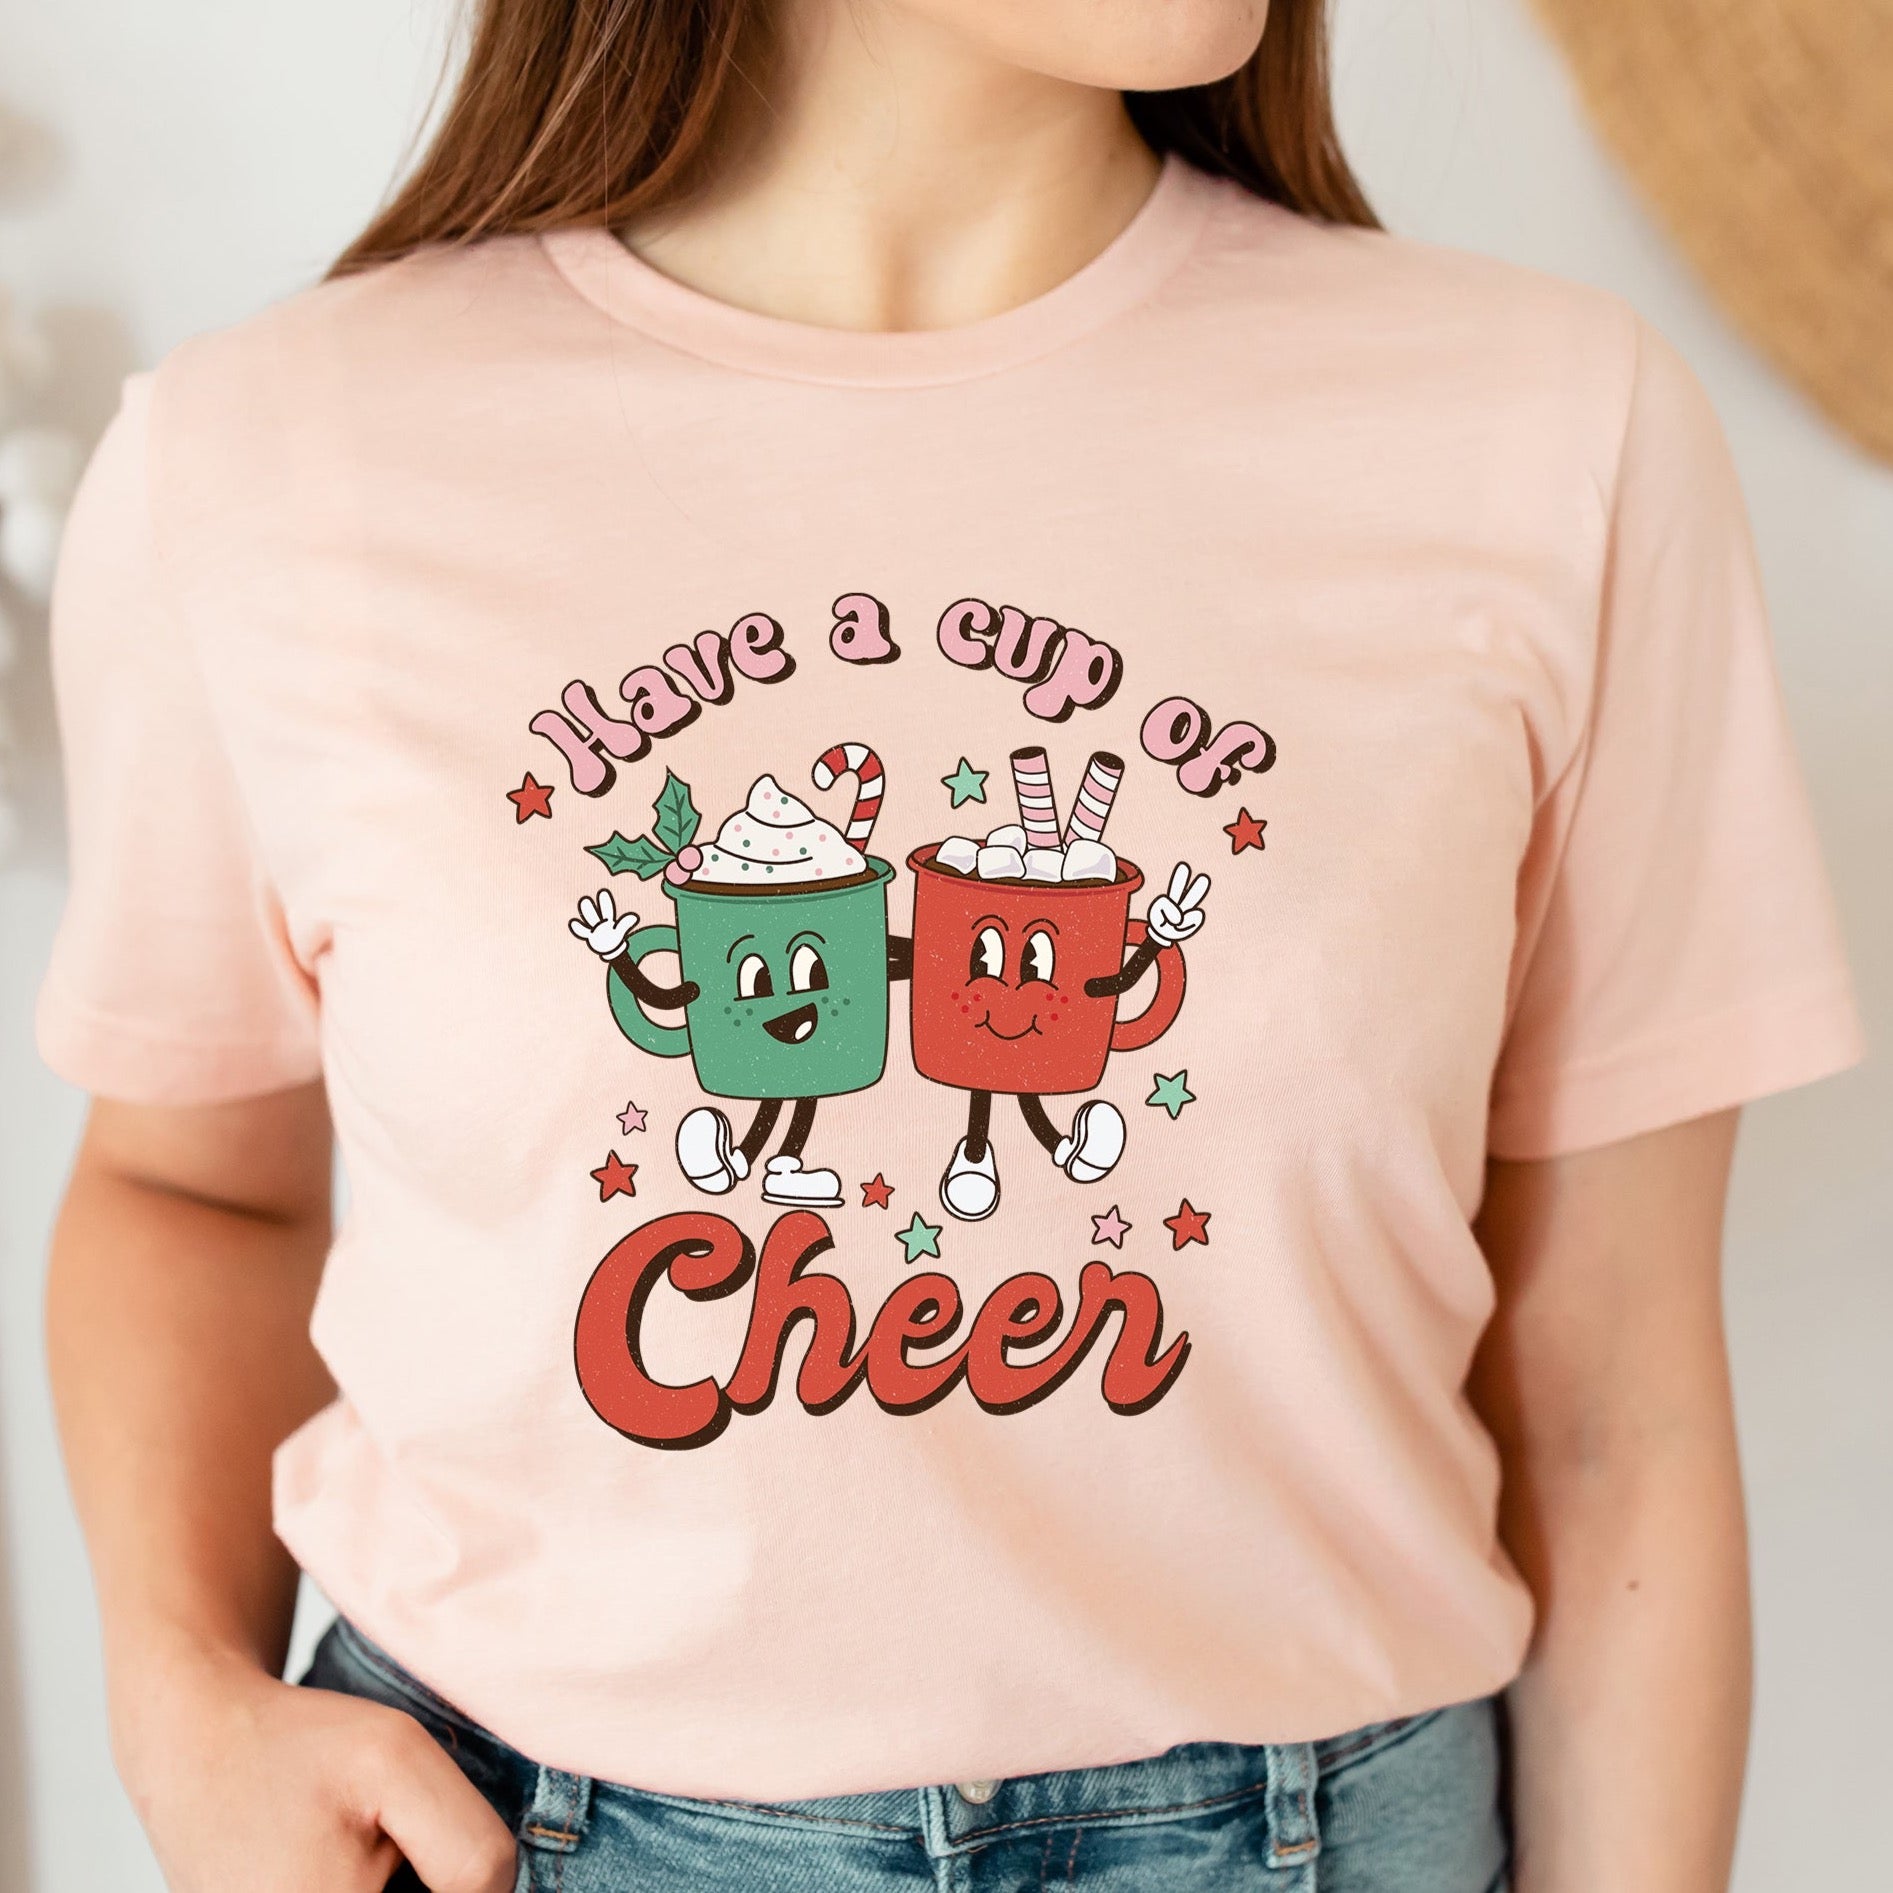 HAVE A CUP OF CHEER CHRISTMAS TSHIRT A025